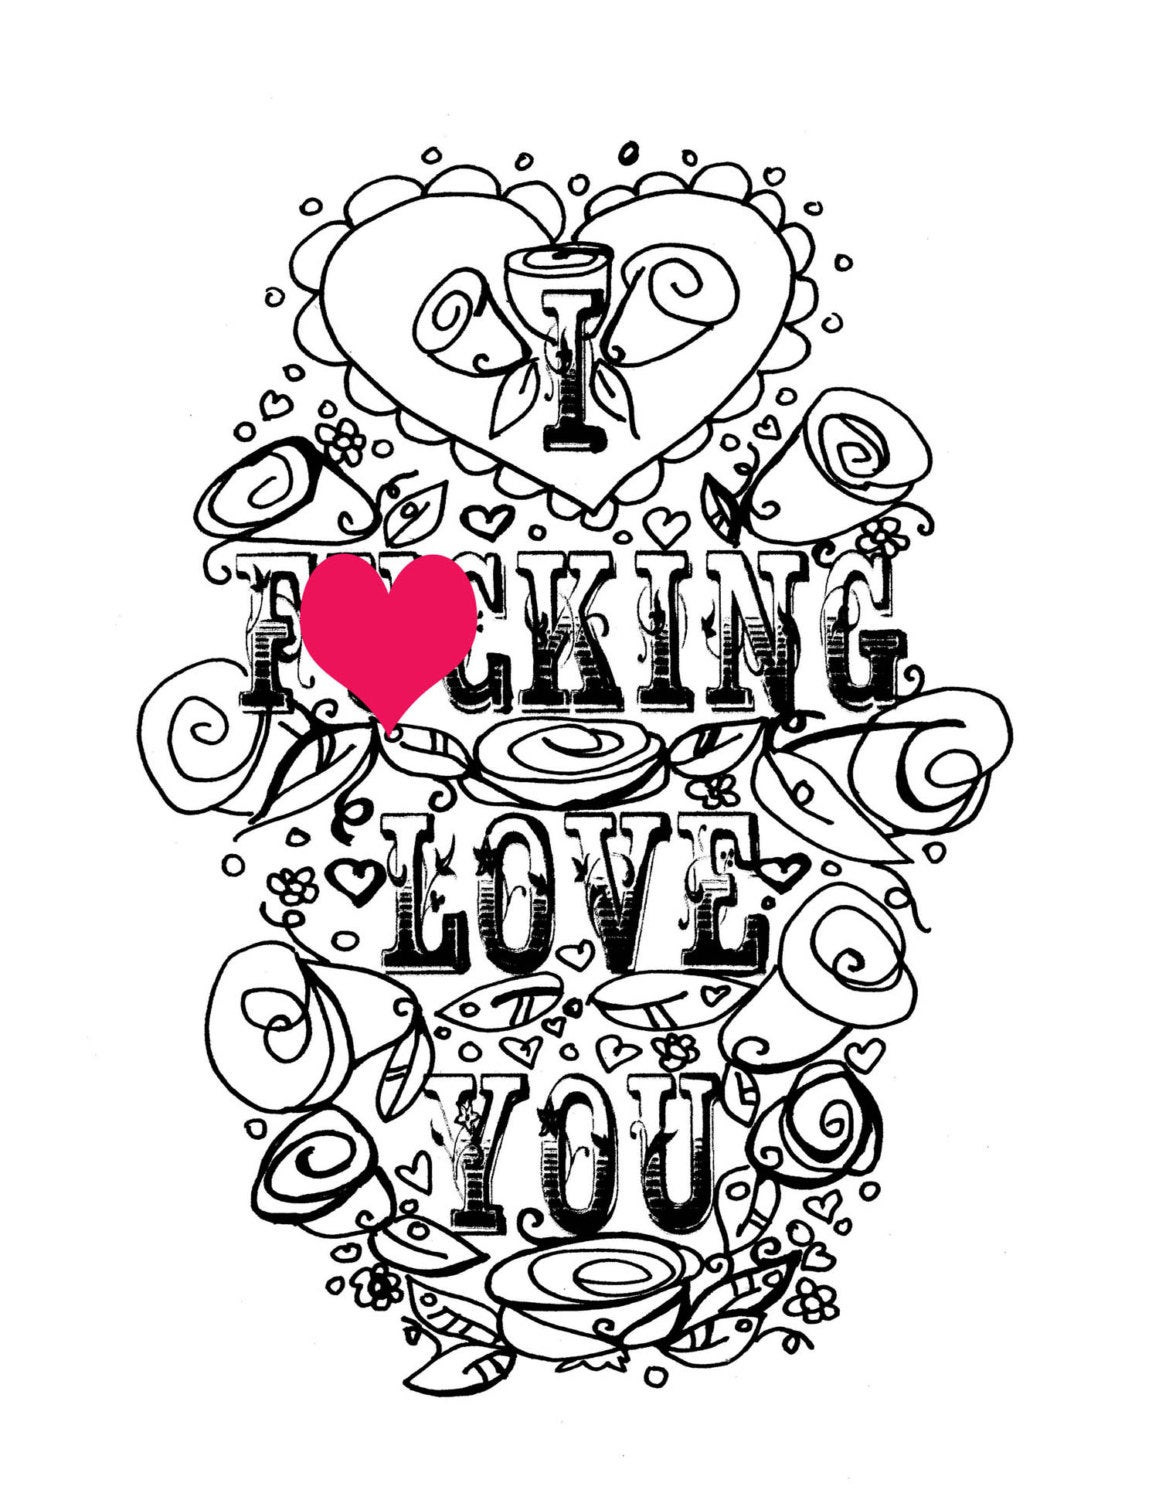 Adult Cursing Coloring Book
 Adult Coloring Page Valentine s Day Curse swear sheet